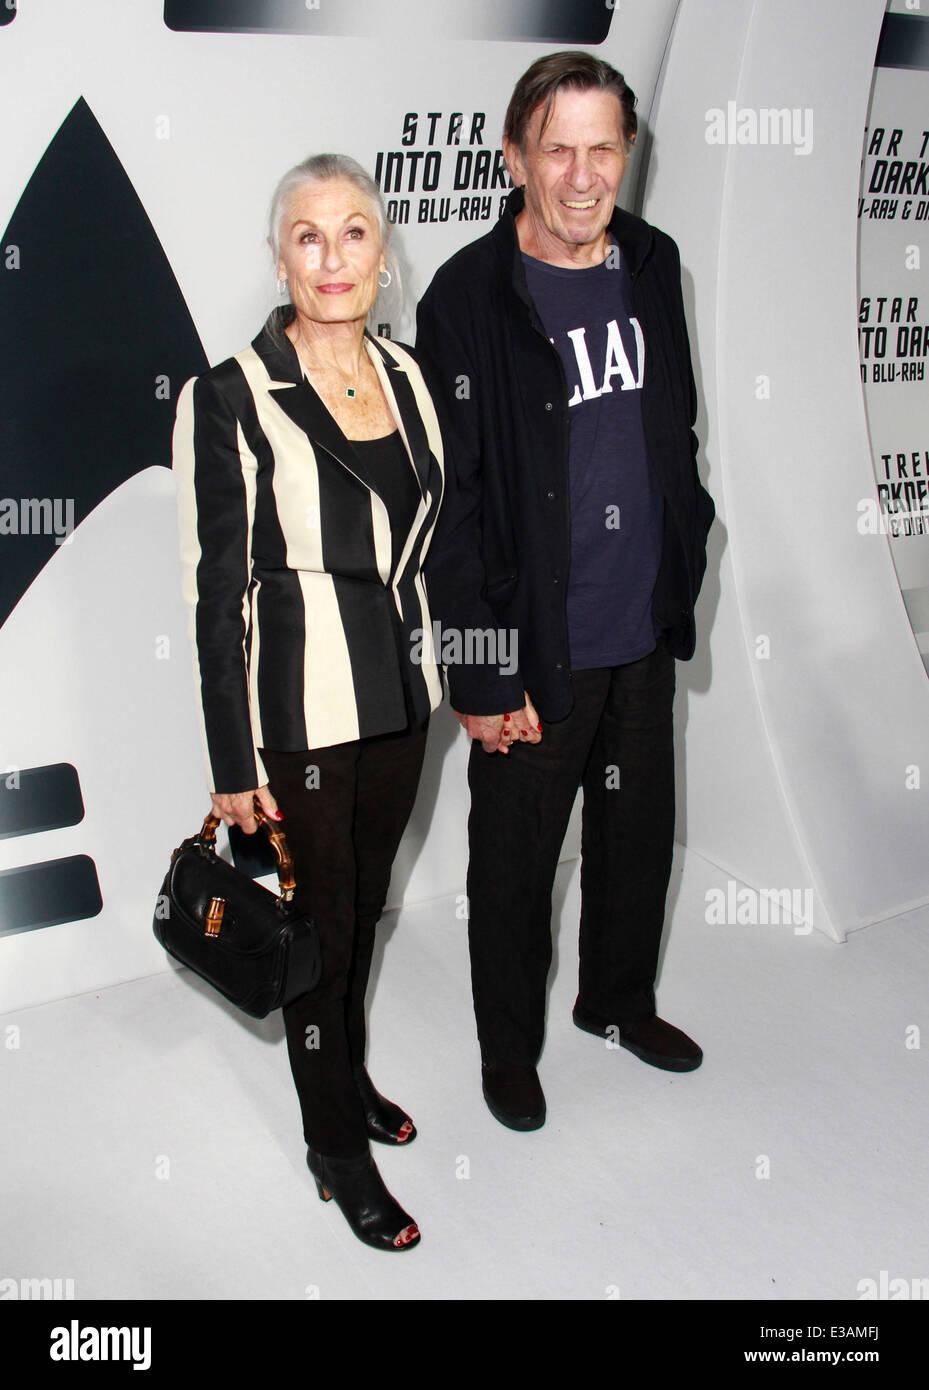 Paramount Pictures Celebrates The Blu-ray And DVD Debut Of 'Star Trek: Into Darkness' Held at California Science Center  Featuring: Leonard Nimoy,Susan Bay Where: Los Angeles, California, United States When: 11 Sep 2013 Stock Photo